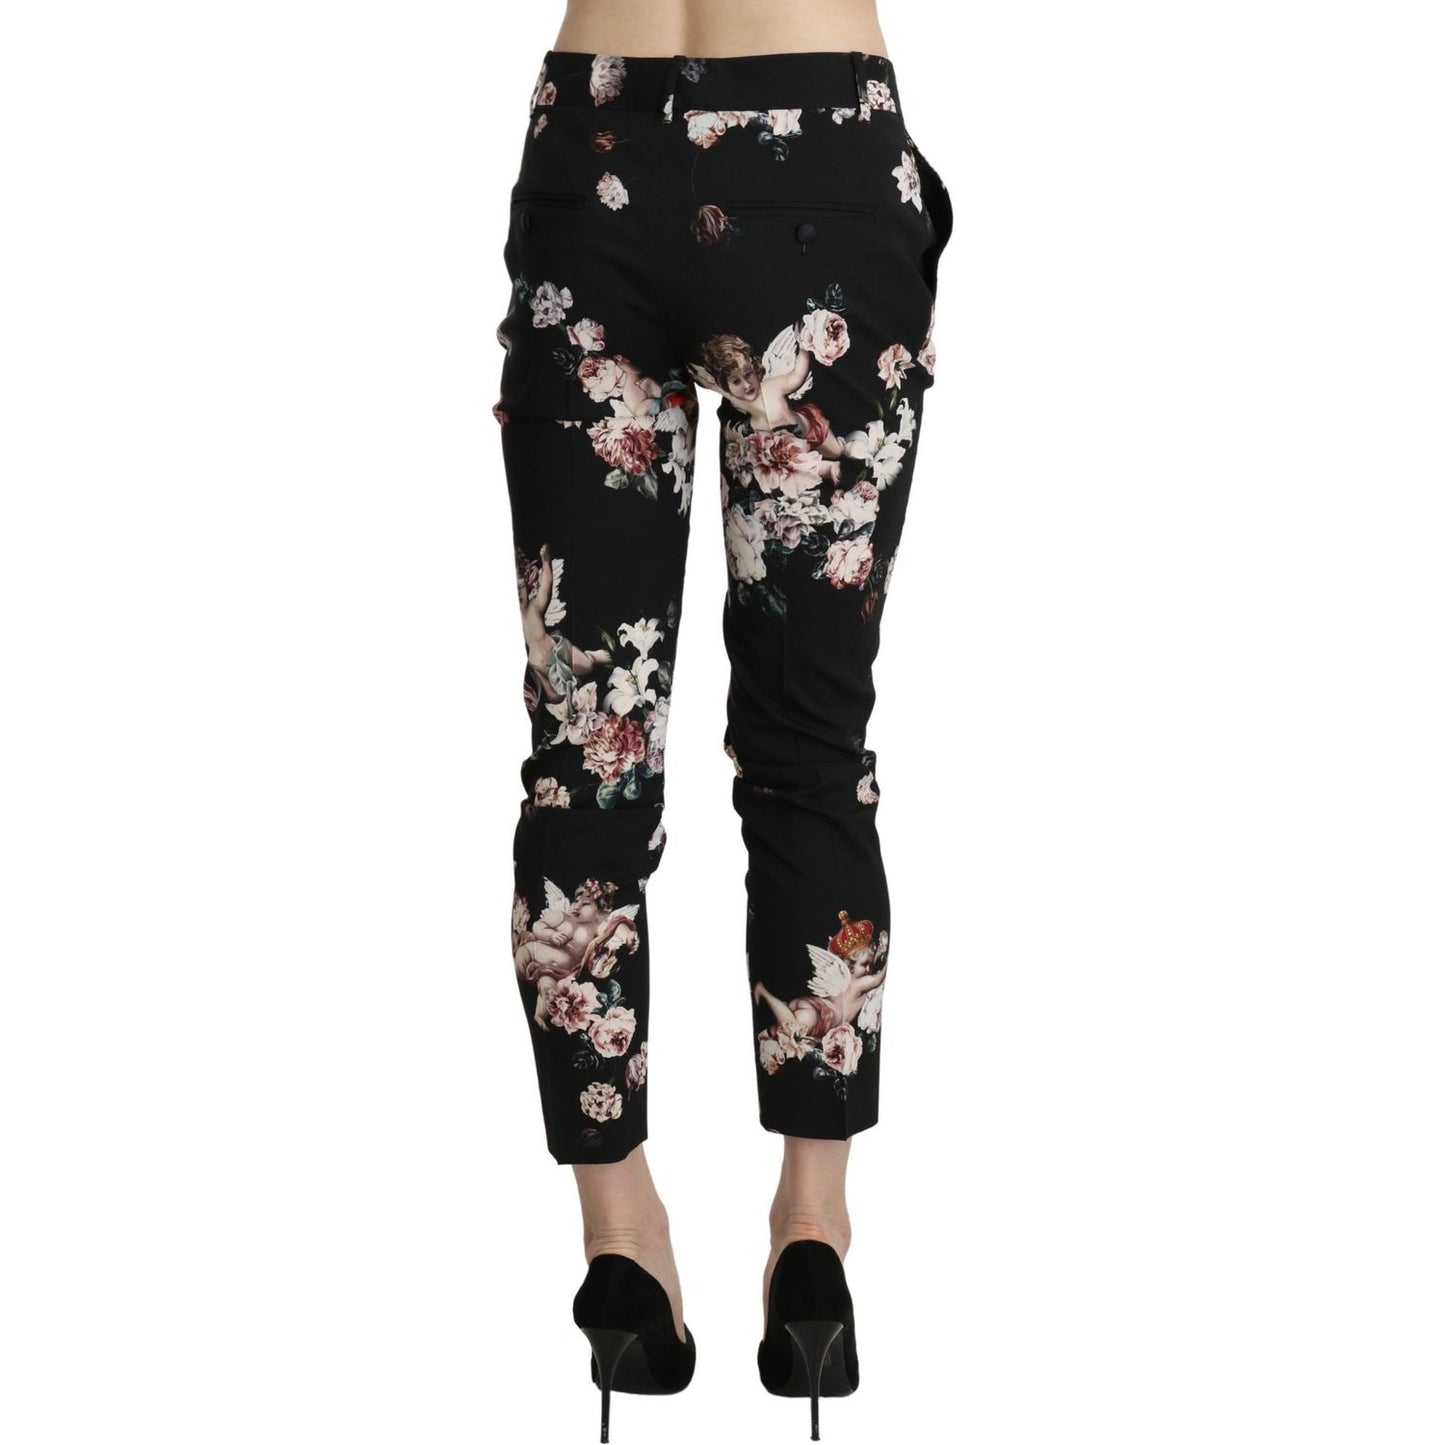 Dolce & Gabbana Elegant High Waist Cropped Trousers Jeans & Pants black-angel-floral-cropped-trouser-wool-pants IMG_0966-scaled-e579ef7d-cbe.jpg